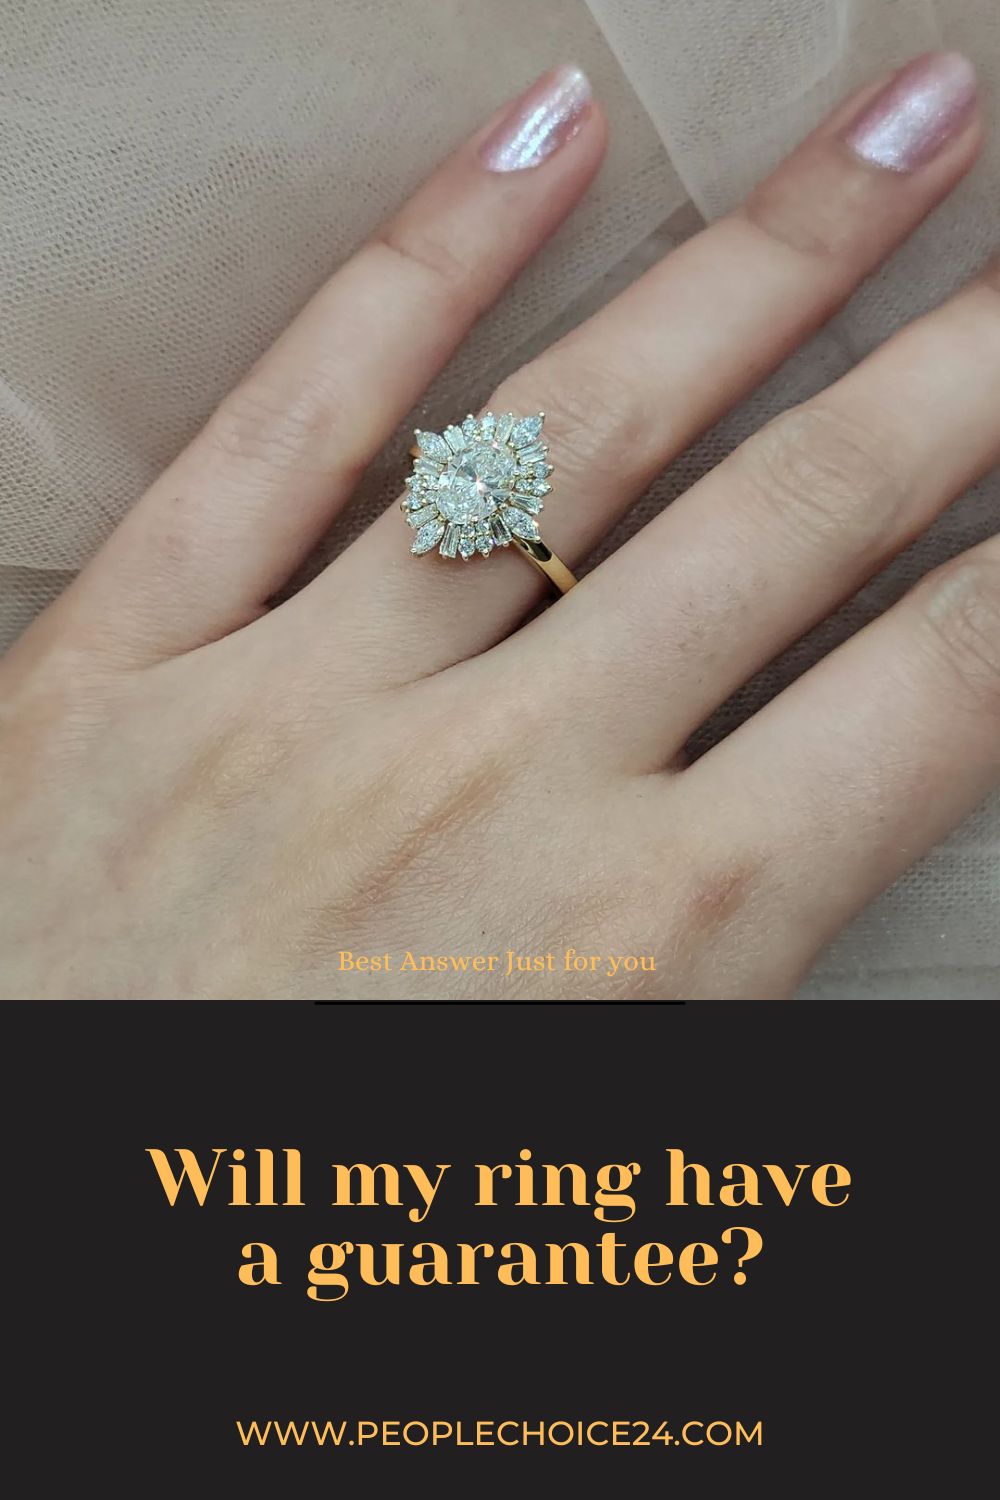 Will my ring have a guarantee